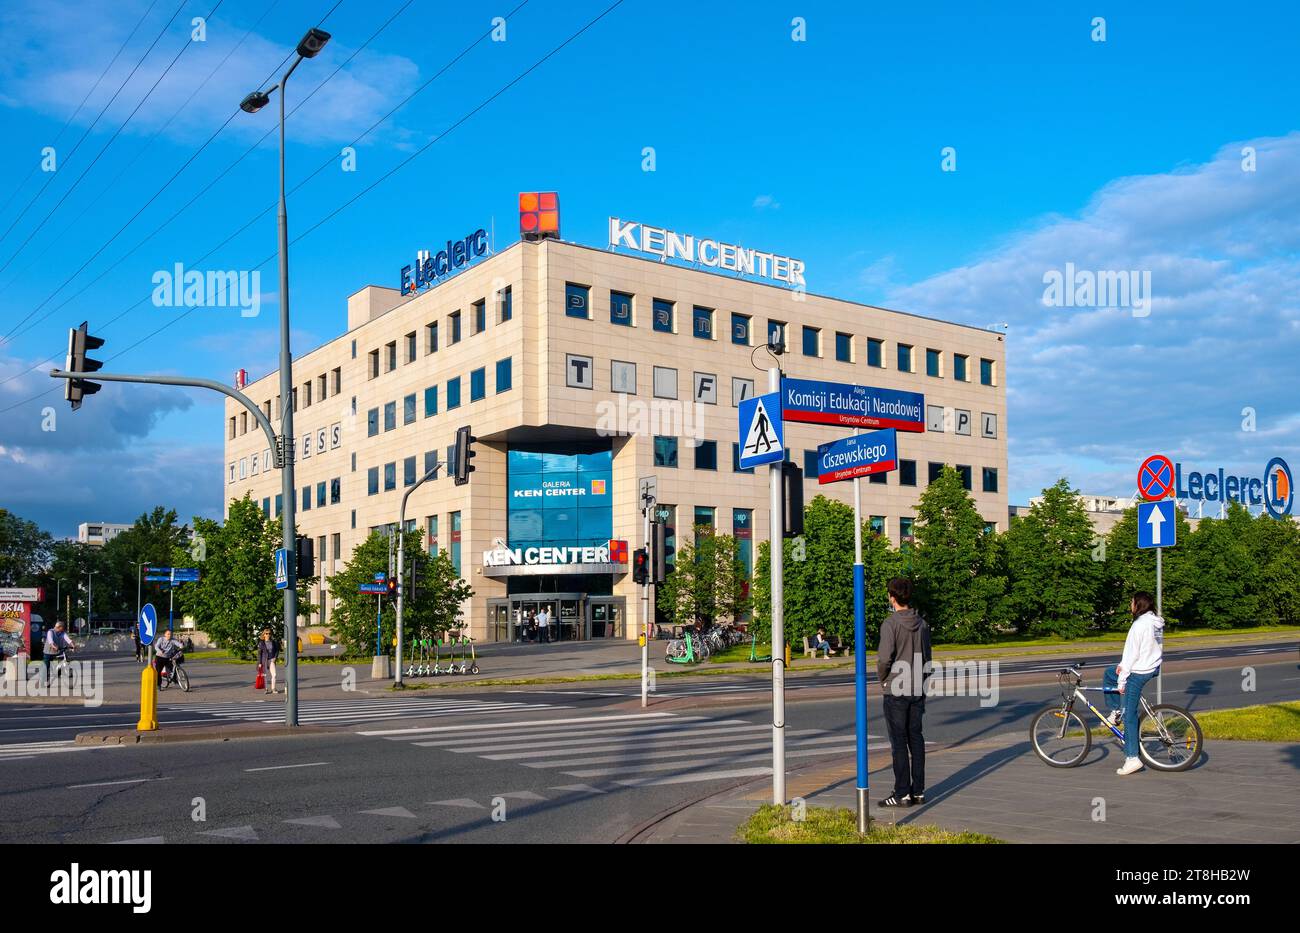 Warsaw, Poland - May 28, 2021: KEN Center office and retail complex at KEN and Ciszewskiego street in Stoklosy quarter of Ursynow district of Warsaw Stock Photo